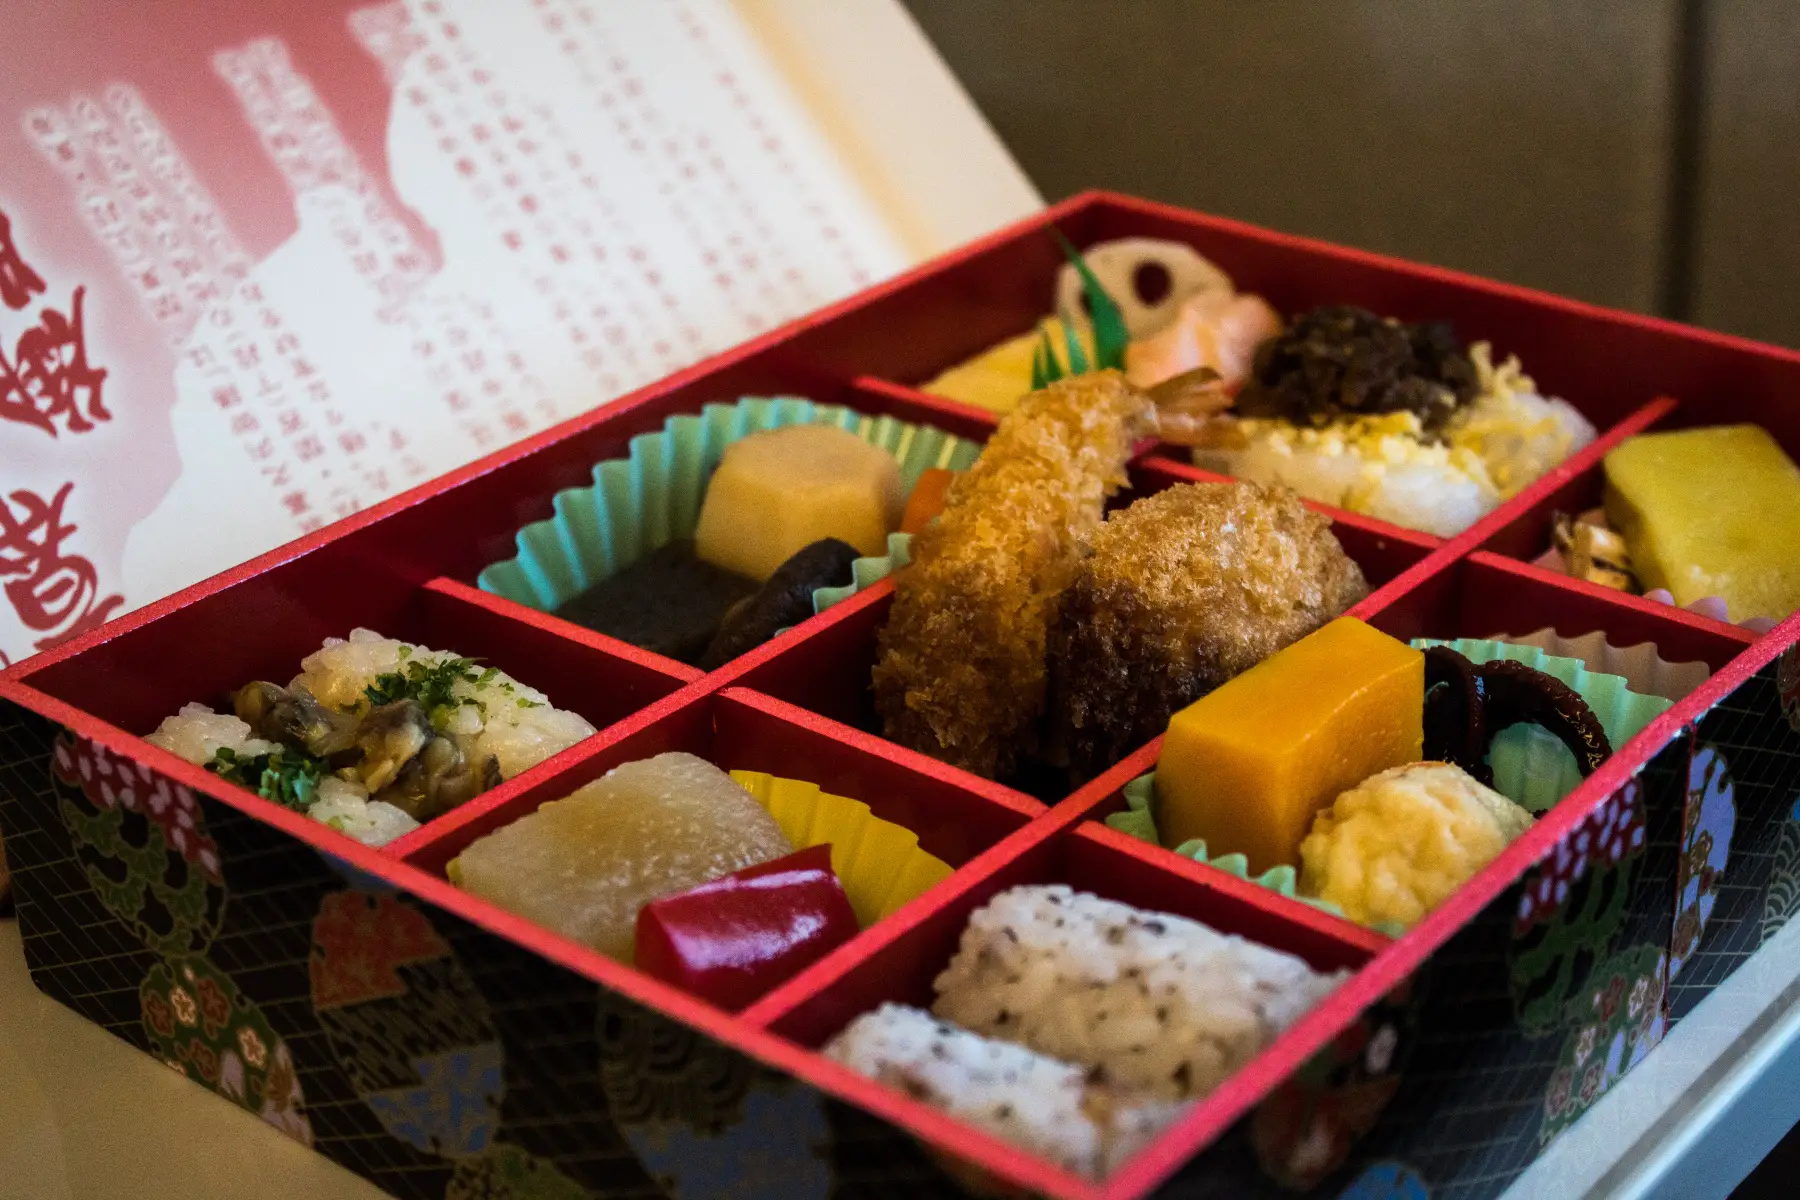 a close up shot of a Bento box full of colorful sushi served on the Shinkansen bullet train